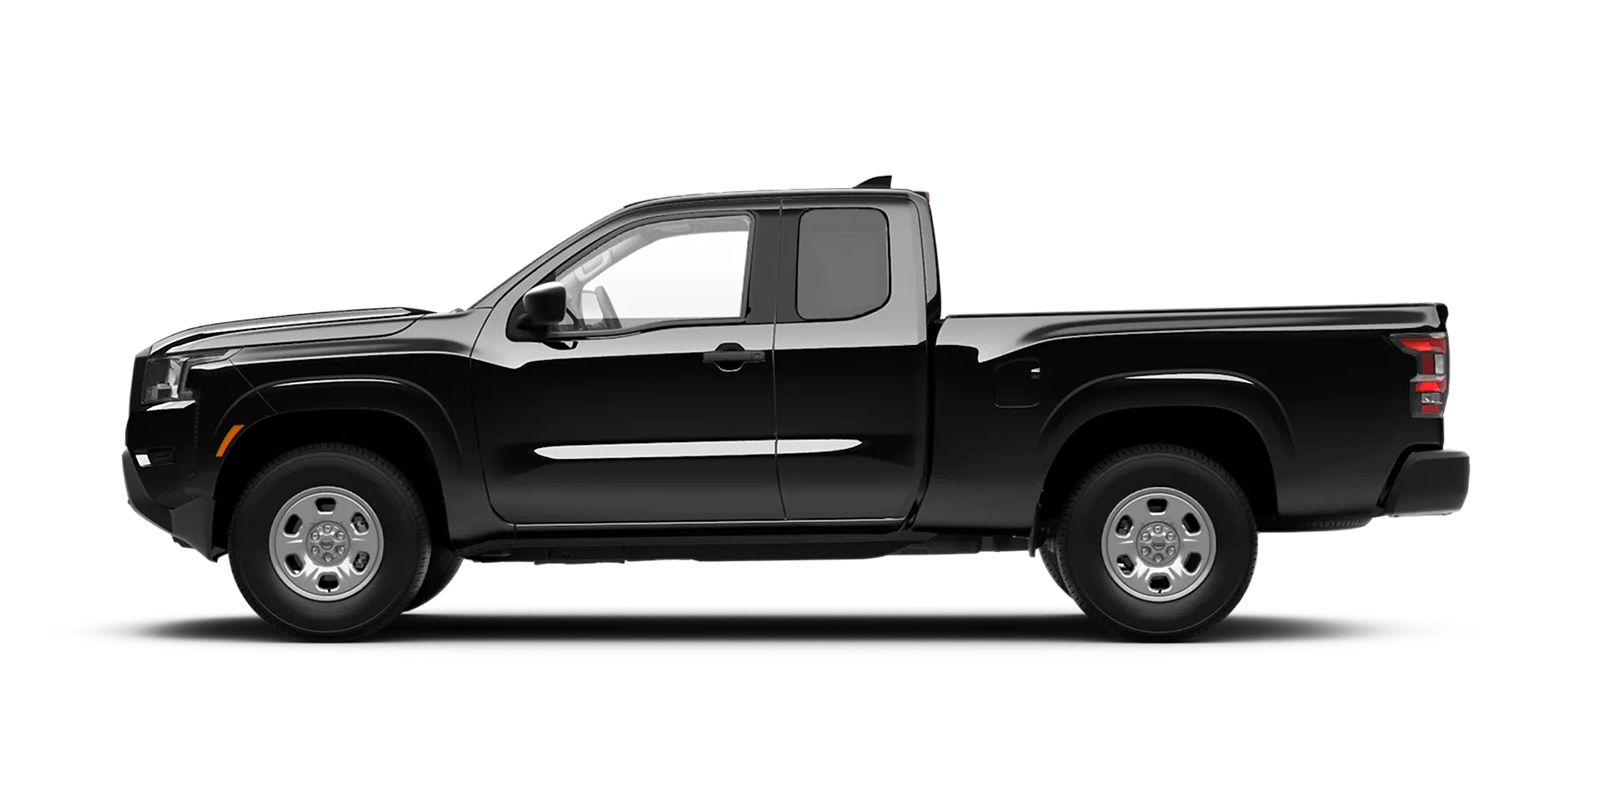 2022 Frontier King Cab S 4x2 in Super Black | Nissan City of Springfield in Springfield NJ